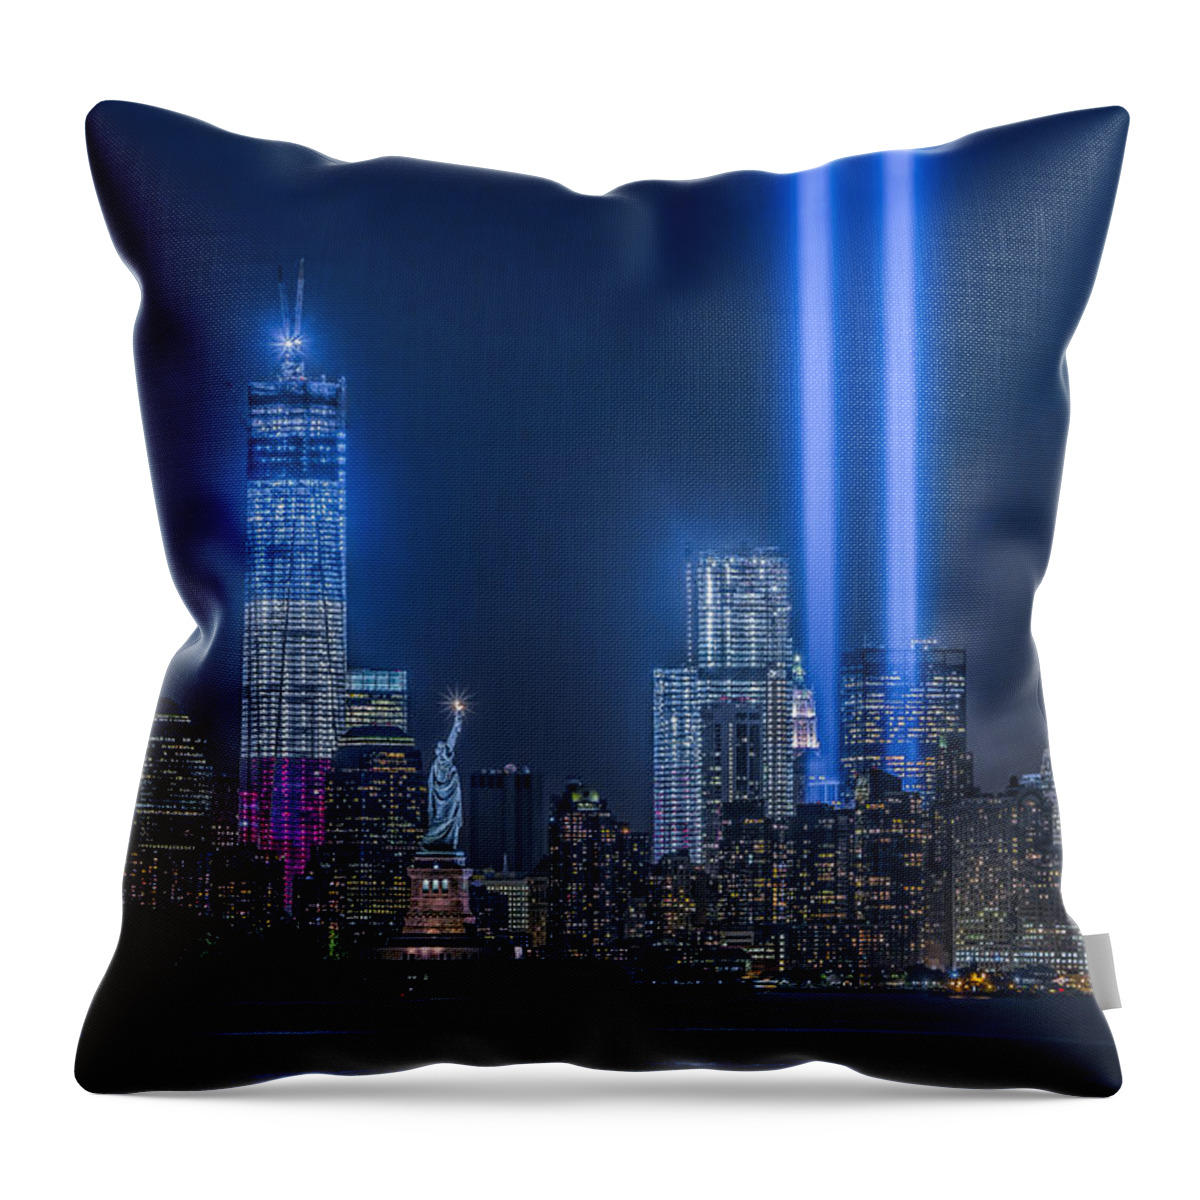 Tribute In Light Throw Pillow featuring the photograph New York City Tribute In Lights by Susan Candelario